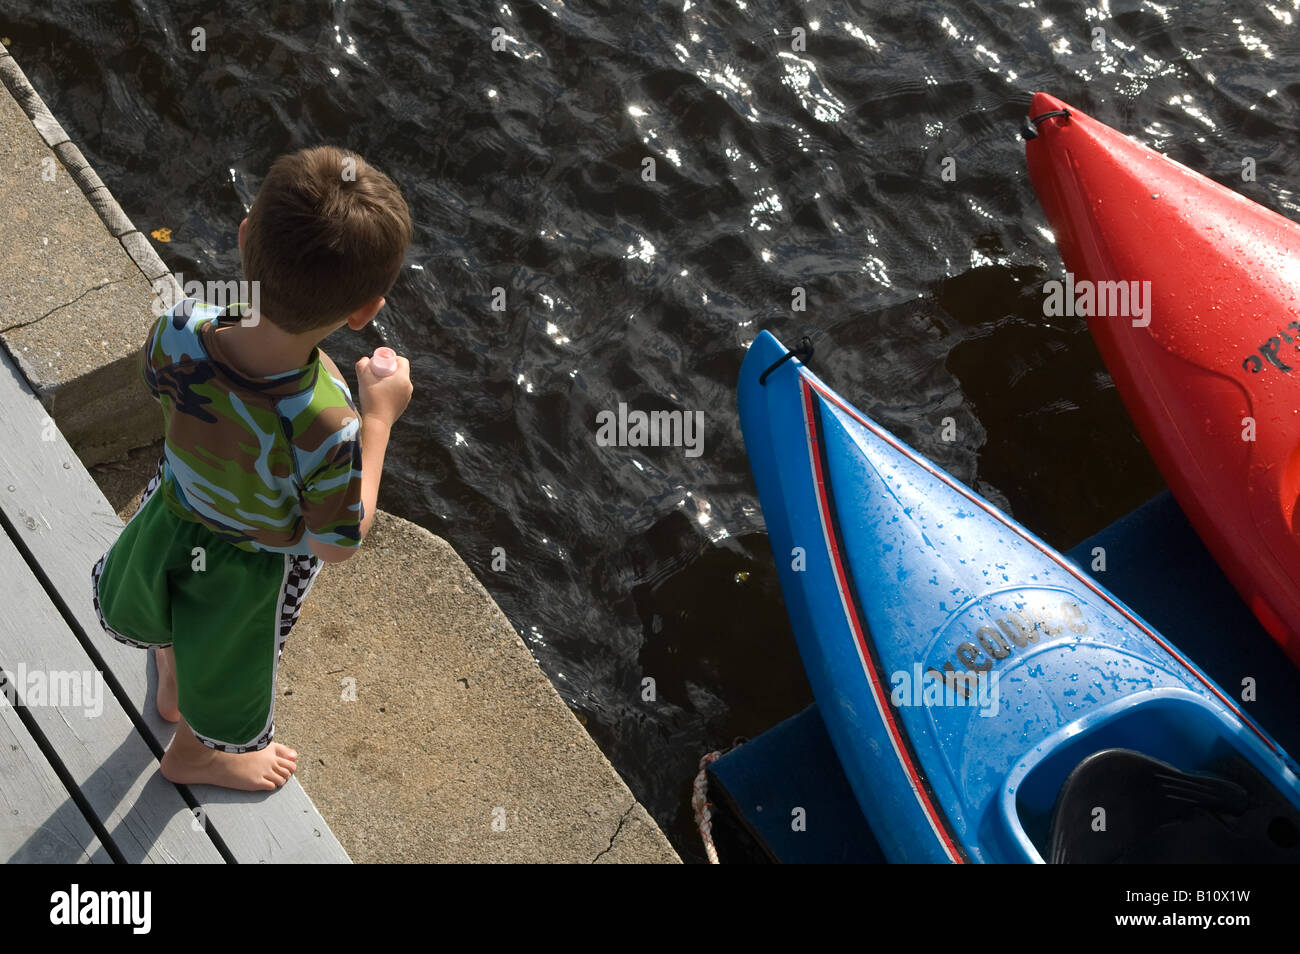 overhead view young boy on boat dock colorful kayaks Stock Photo